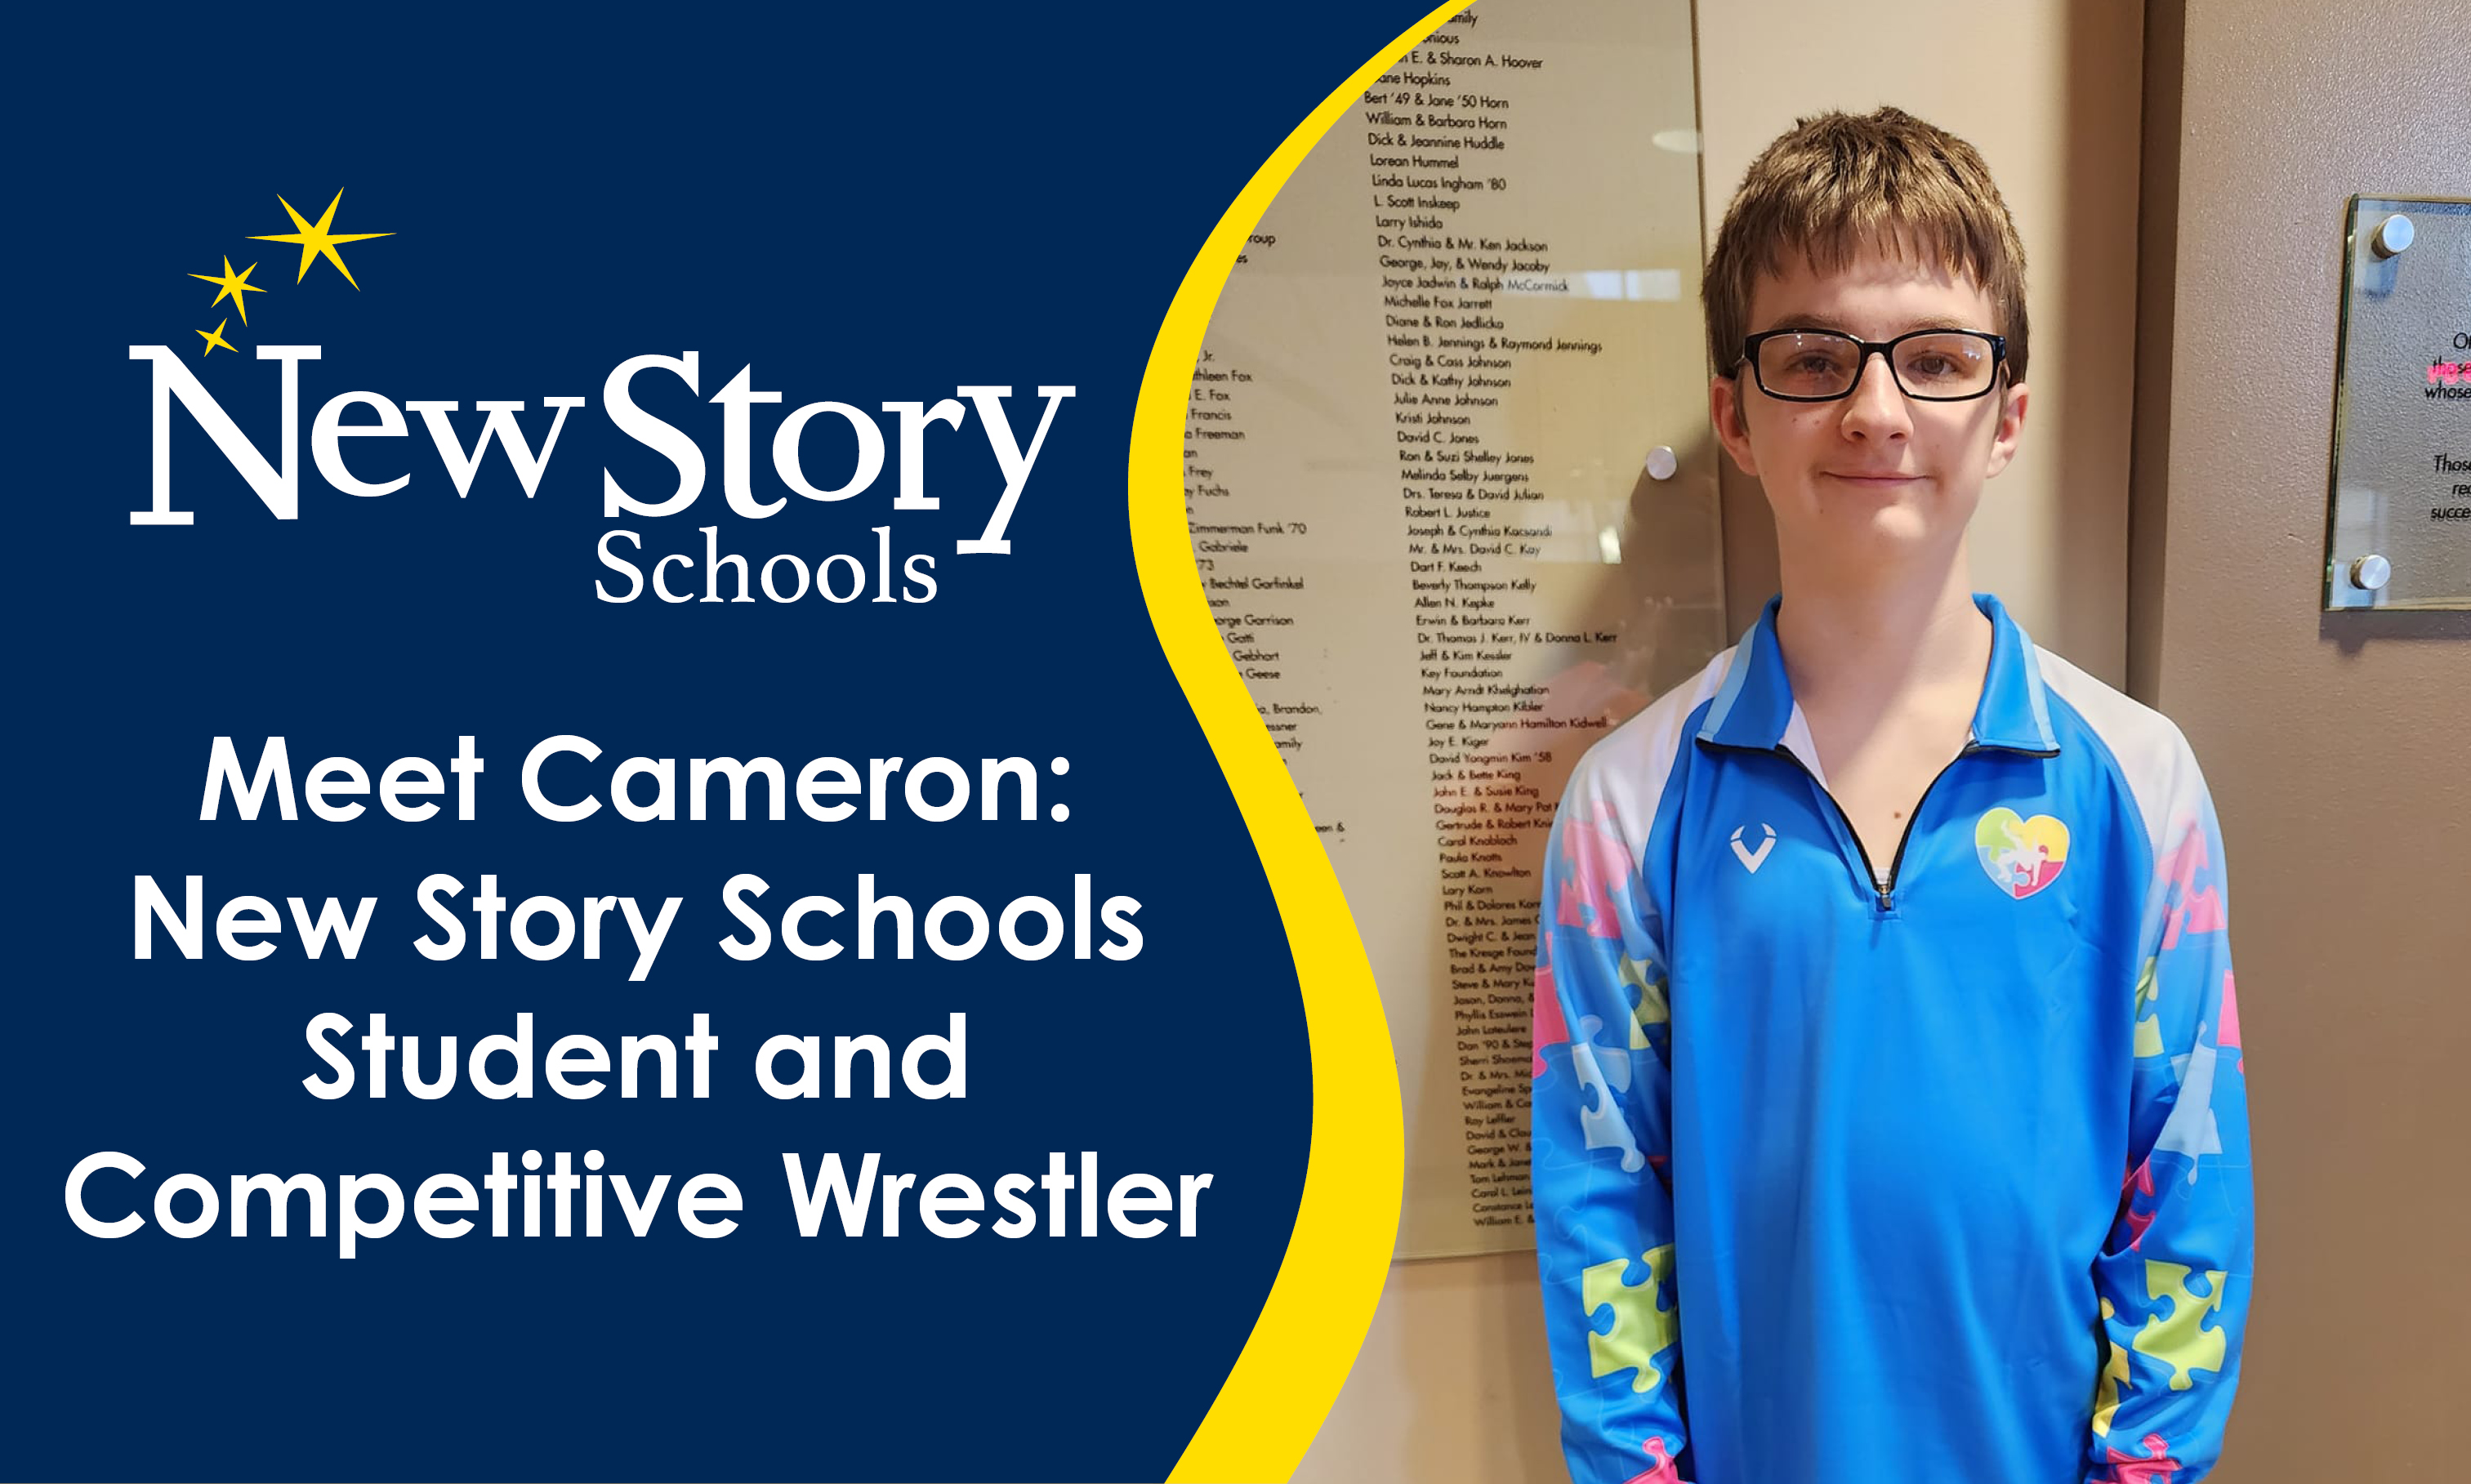 Meet Cameron: New Story Schools Student and Competitive Wrestler